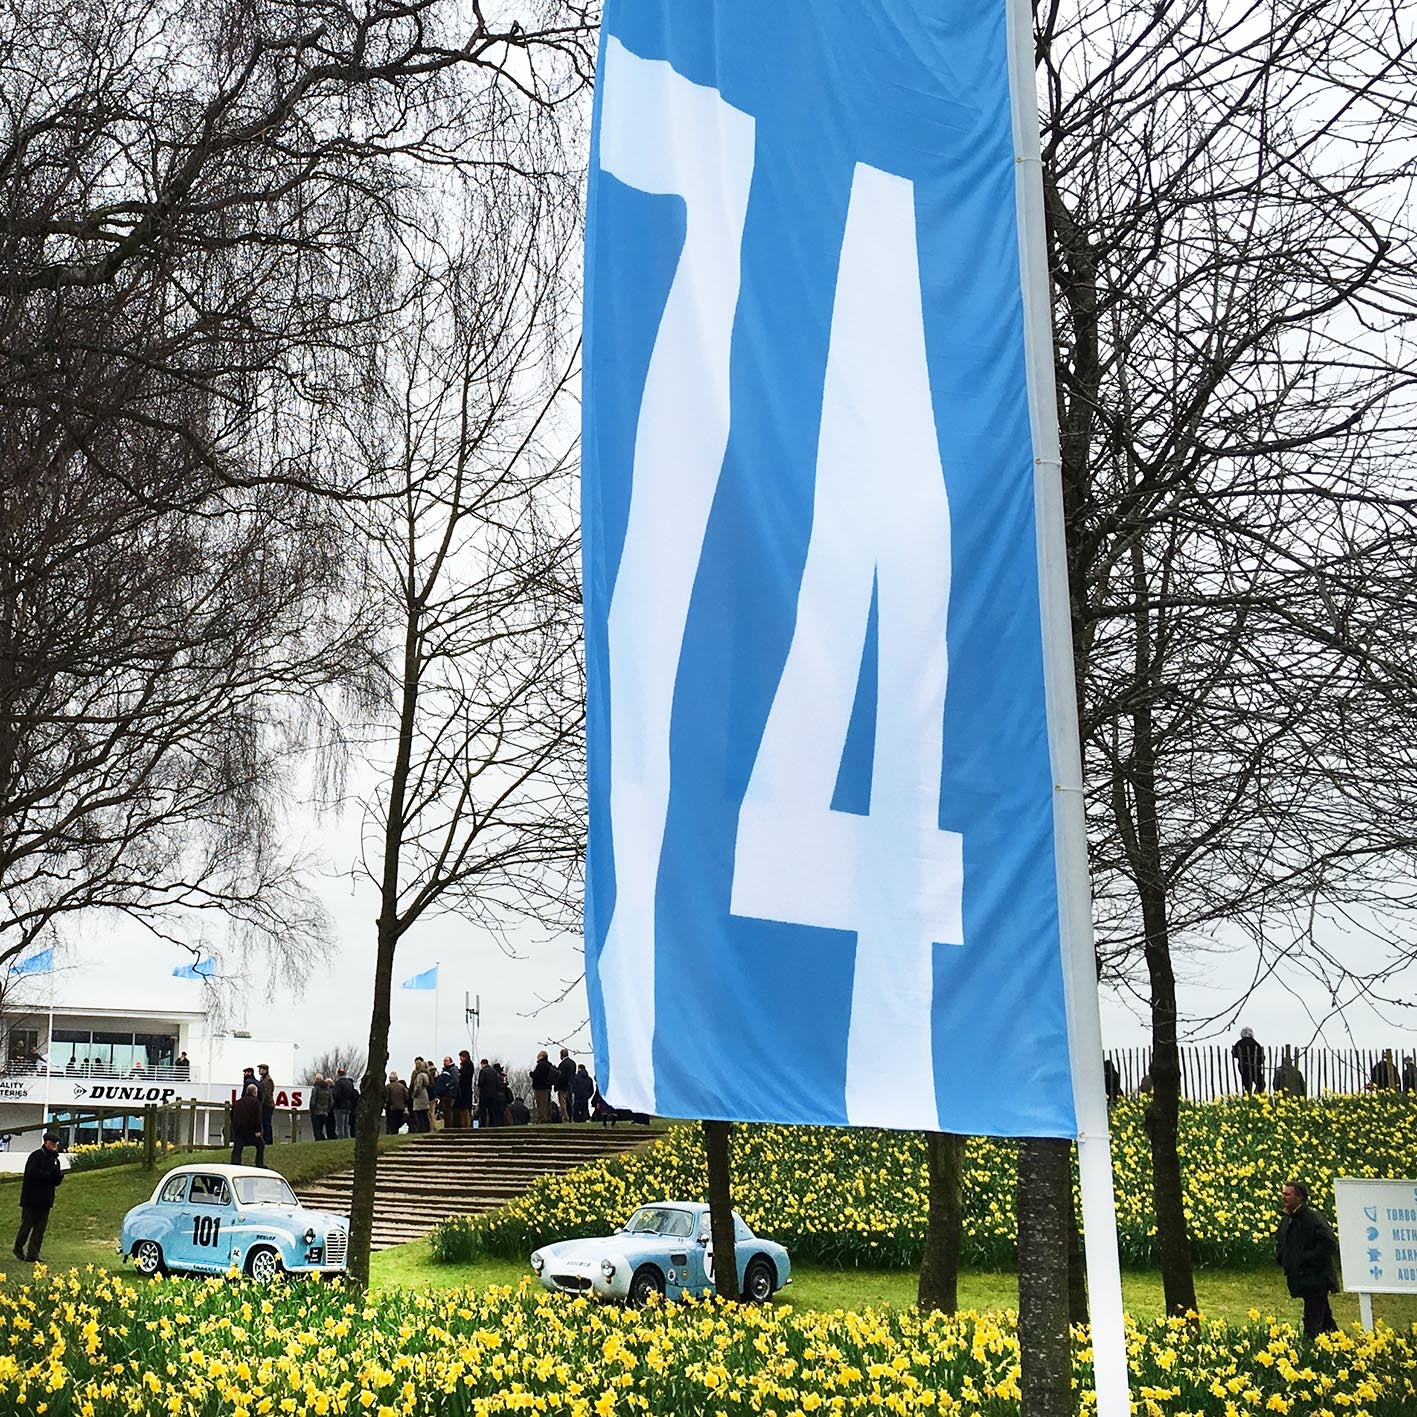 Goodwood crowds flock to the 74th Annual Members' Meeting